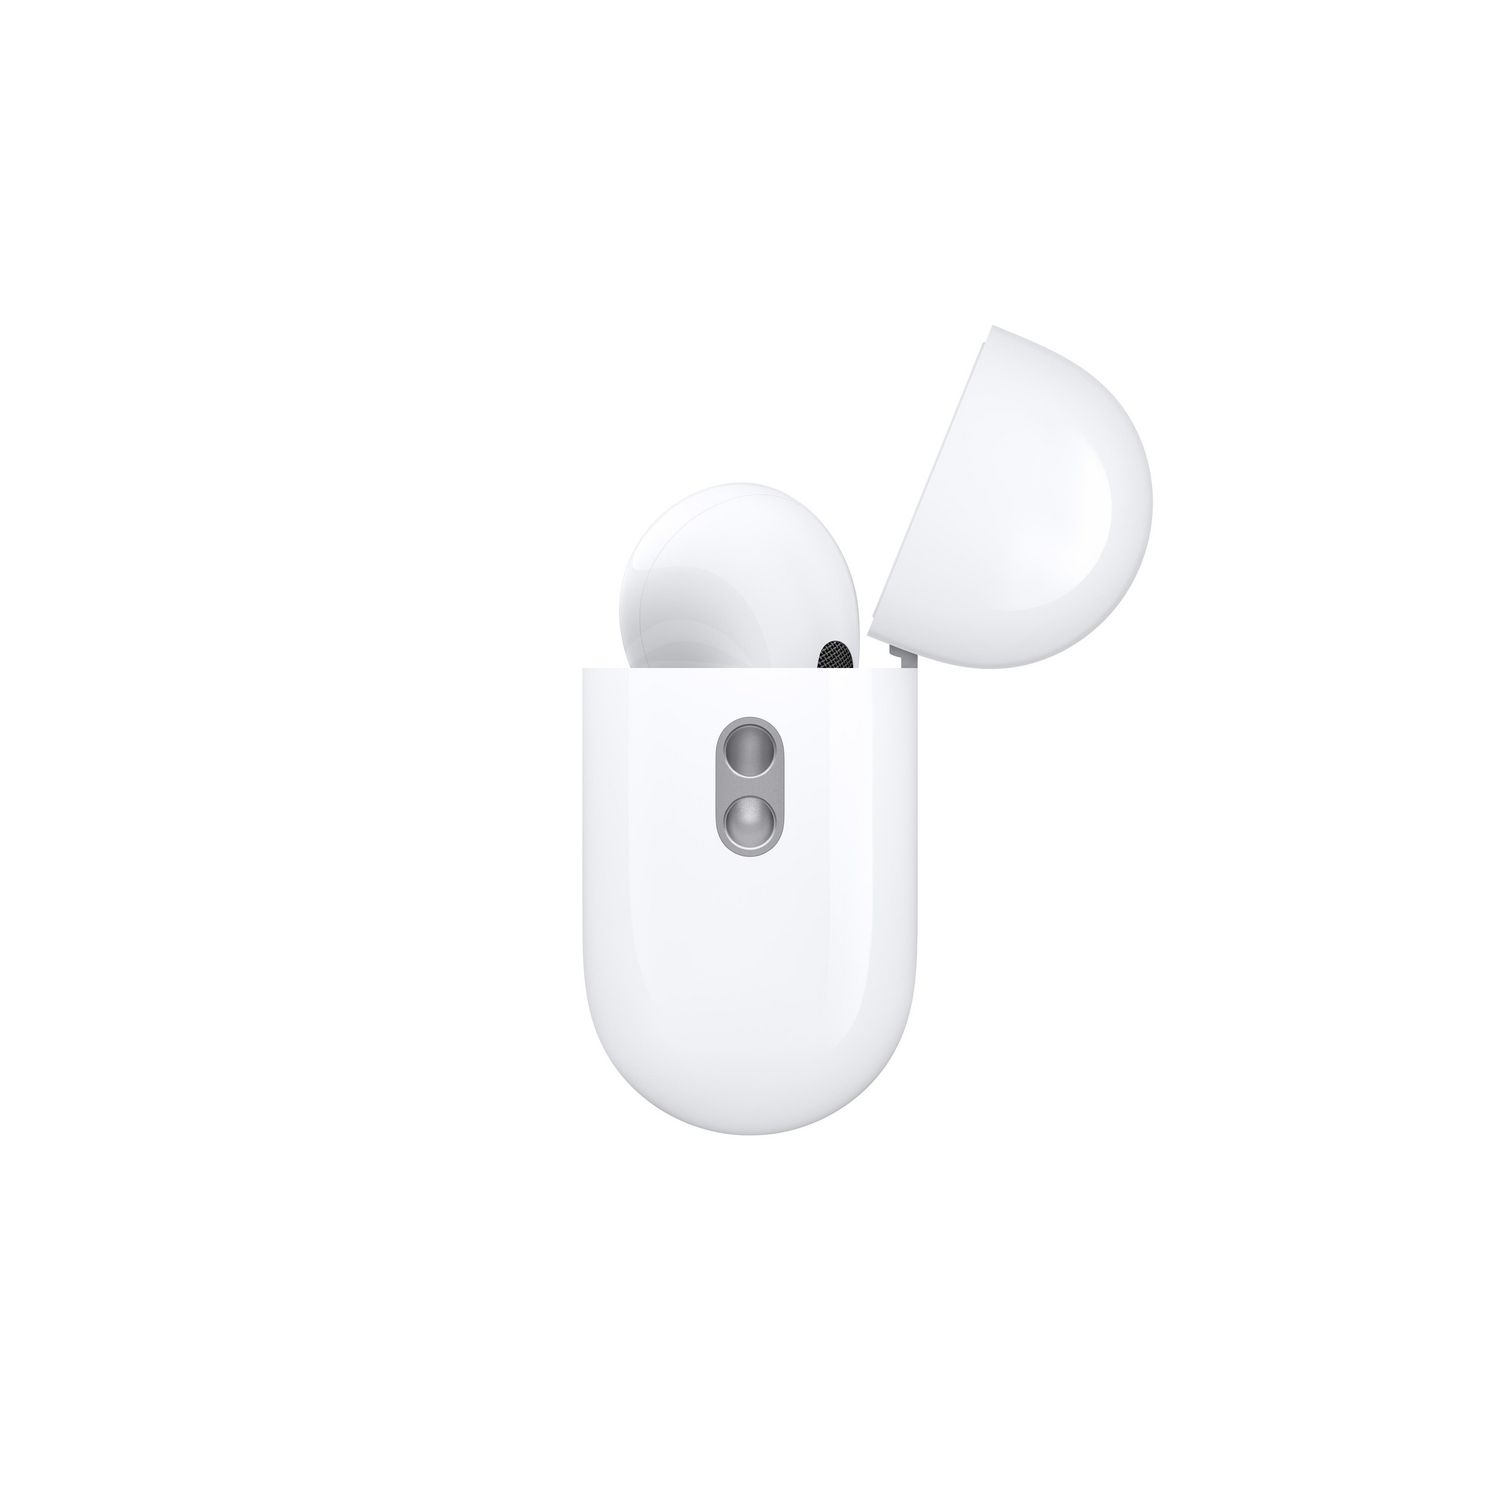 AirPods Pro (2nd generation) with USB-C, Adaptive Audio. Now 